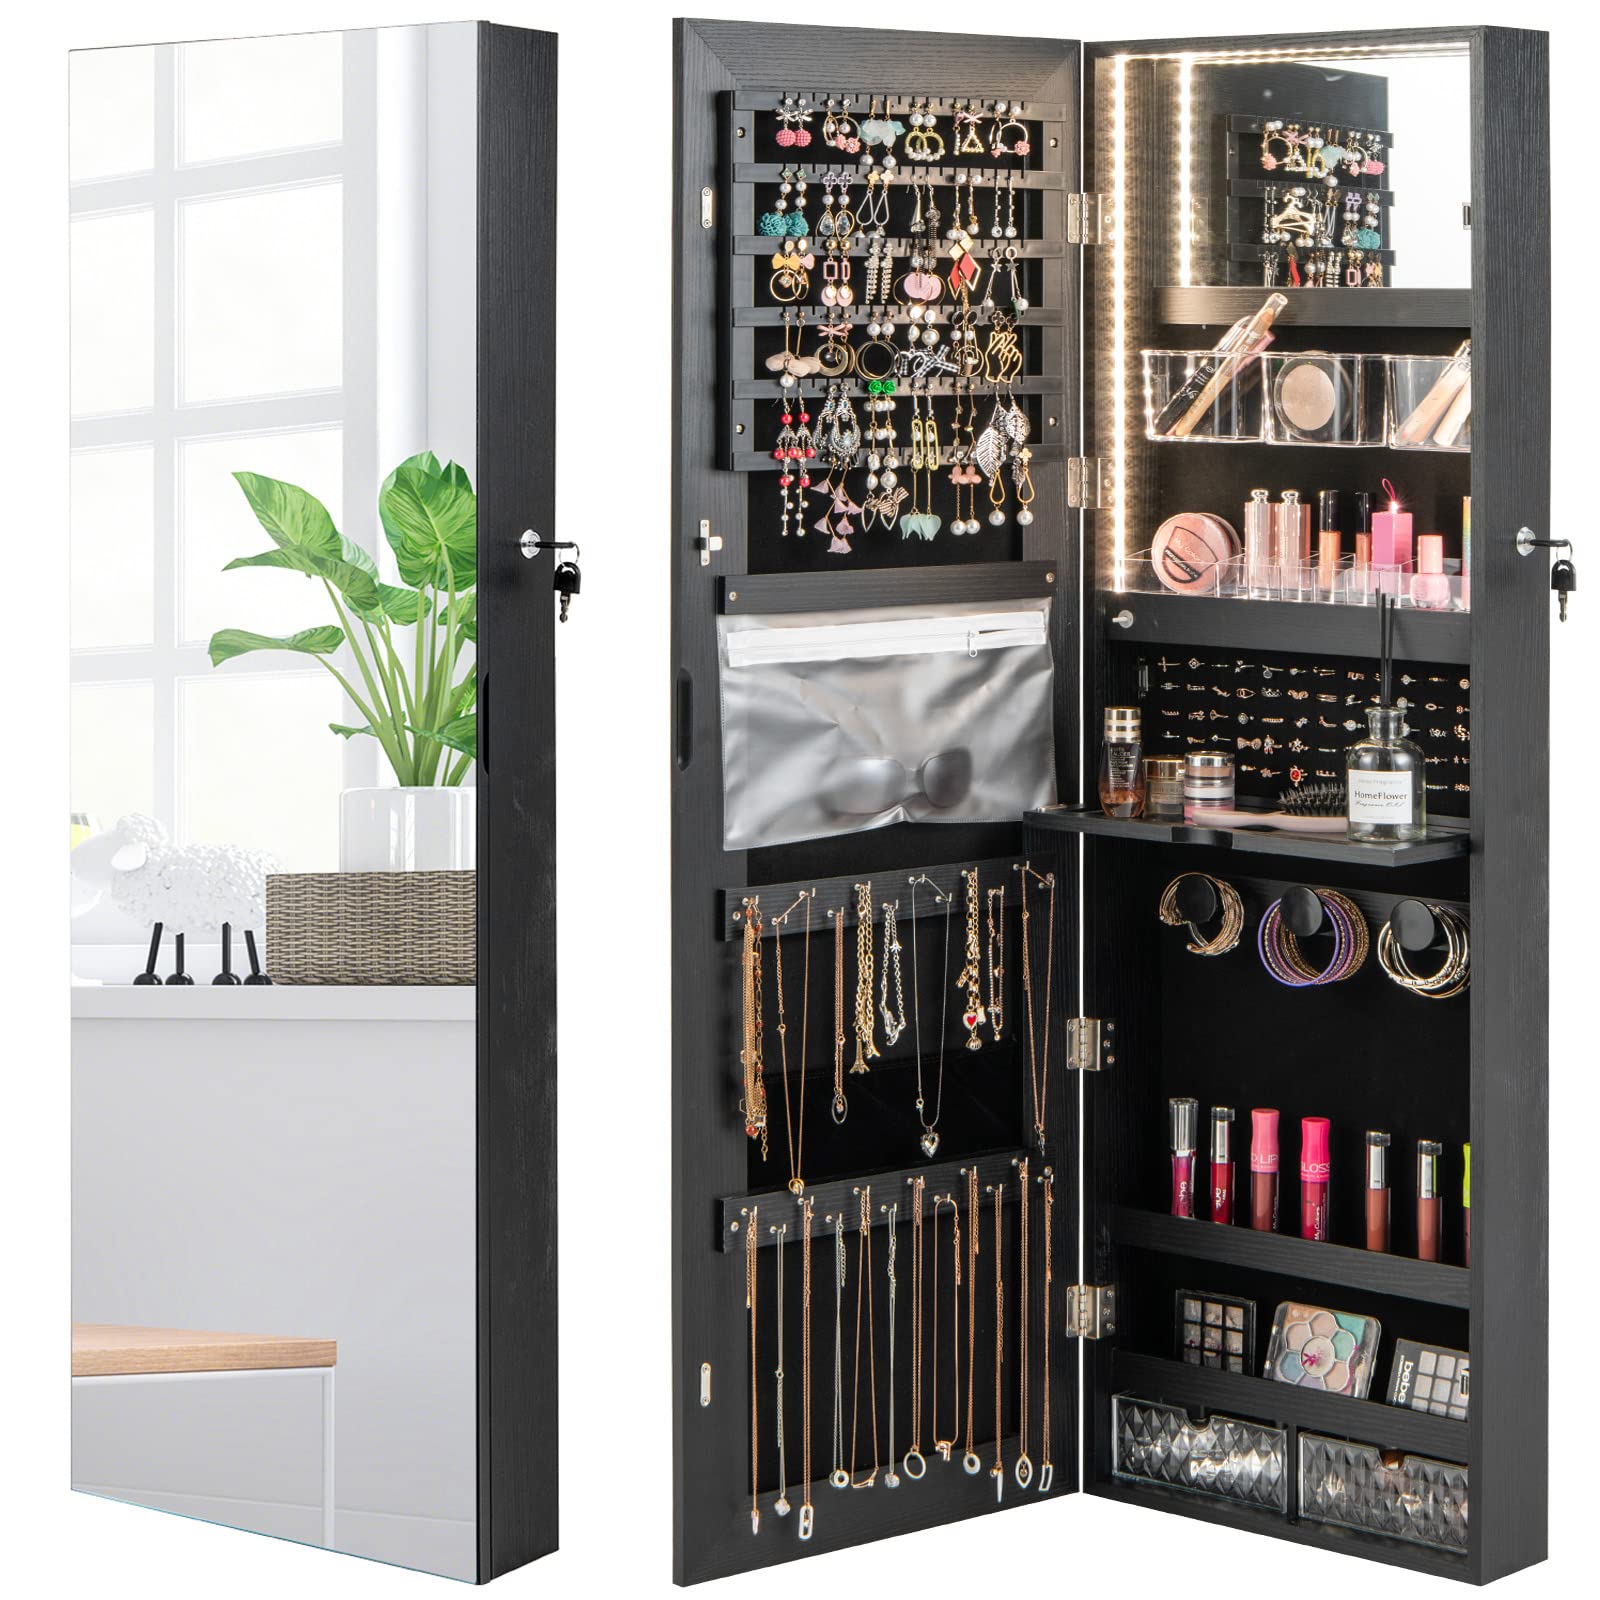 CHARMAID Wall/Door Mounted Jewelry Armoire with 3-Color LED Lights, 47.2"H Full Length Mirror